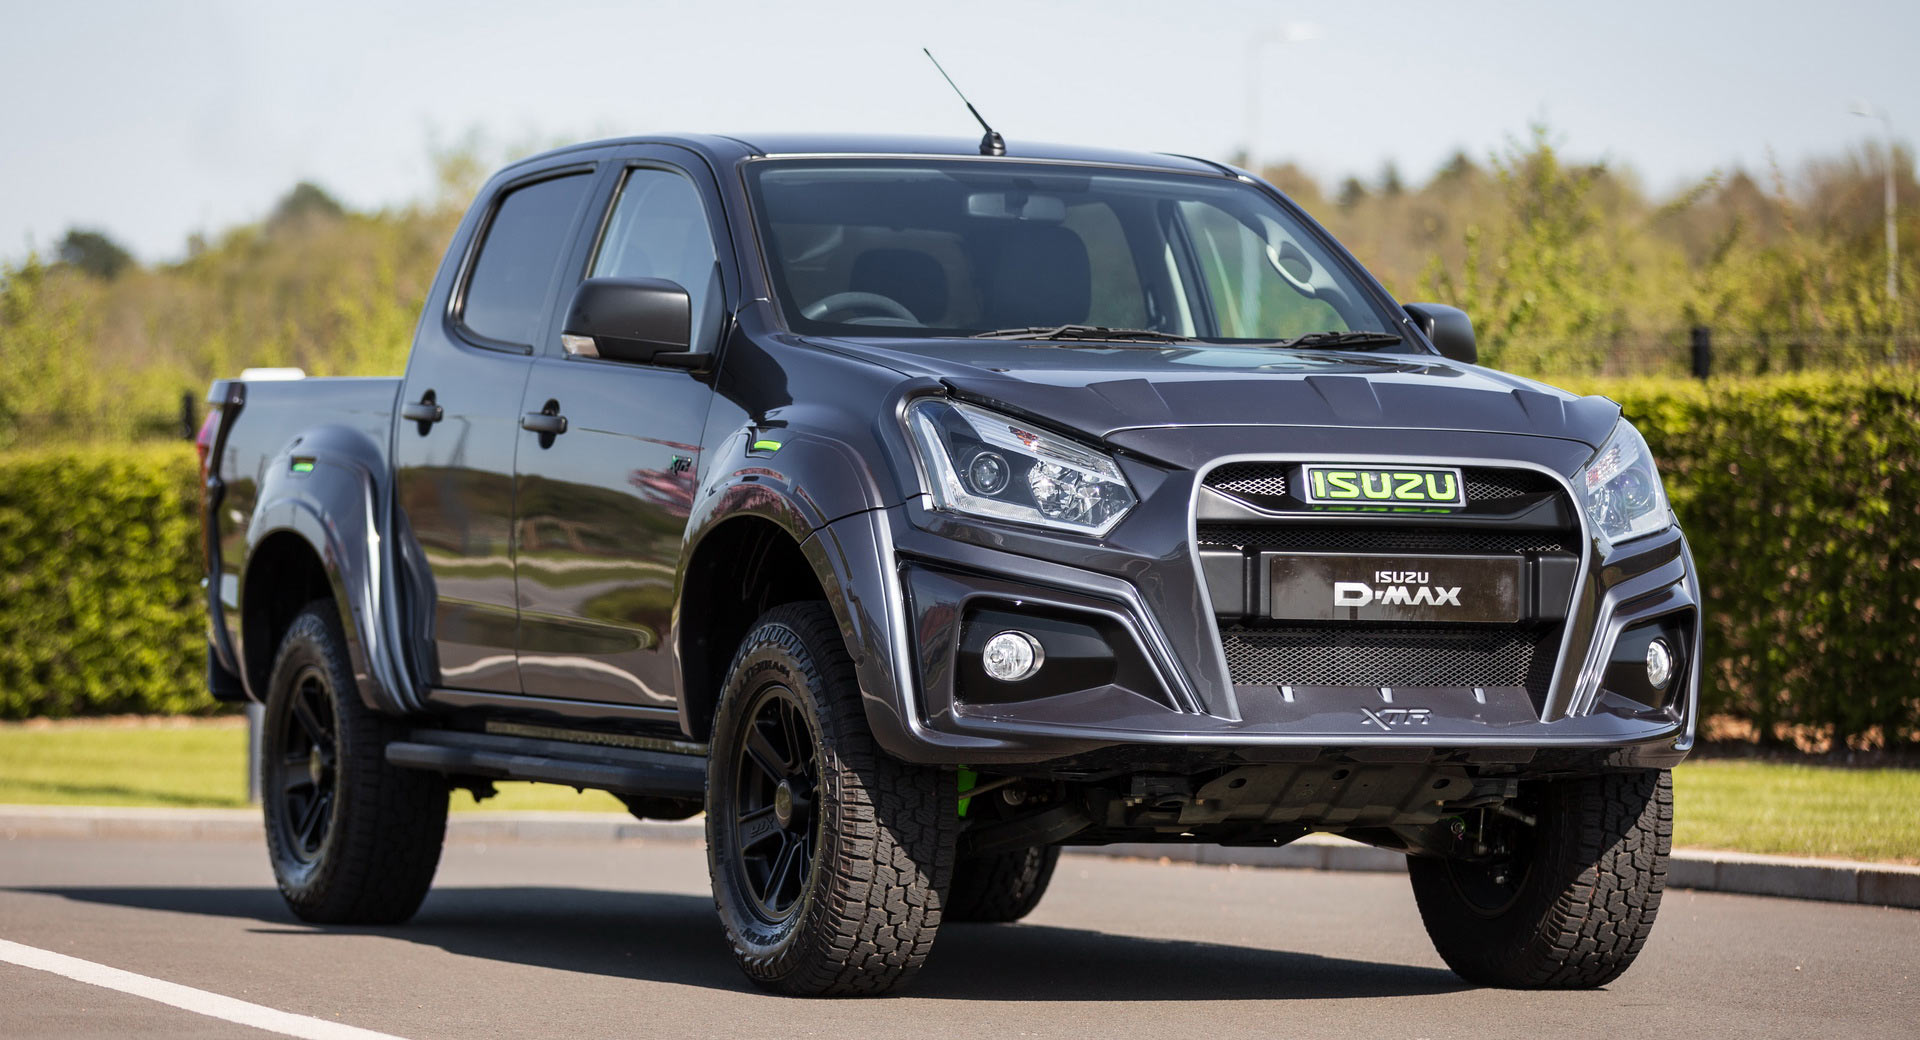 Isuzu DMax XTR Color Edition Can Look Vibrant While Muddy 